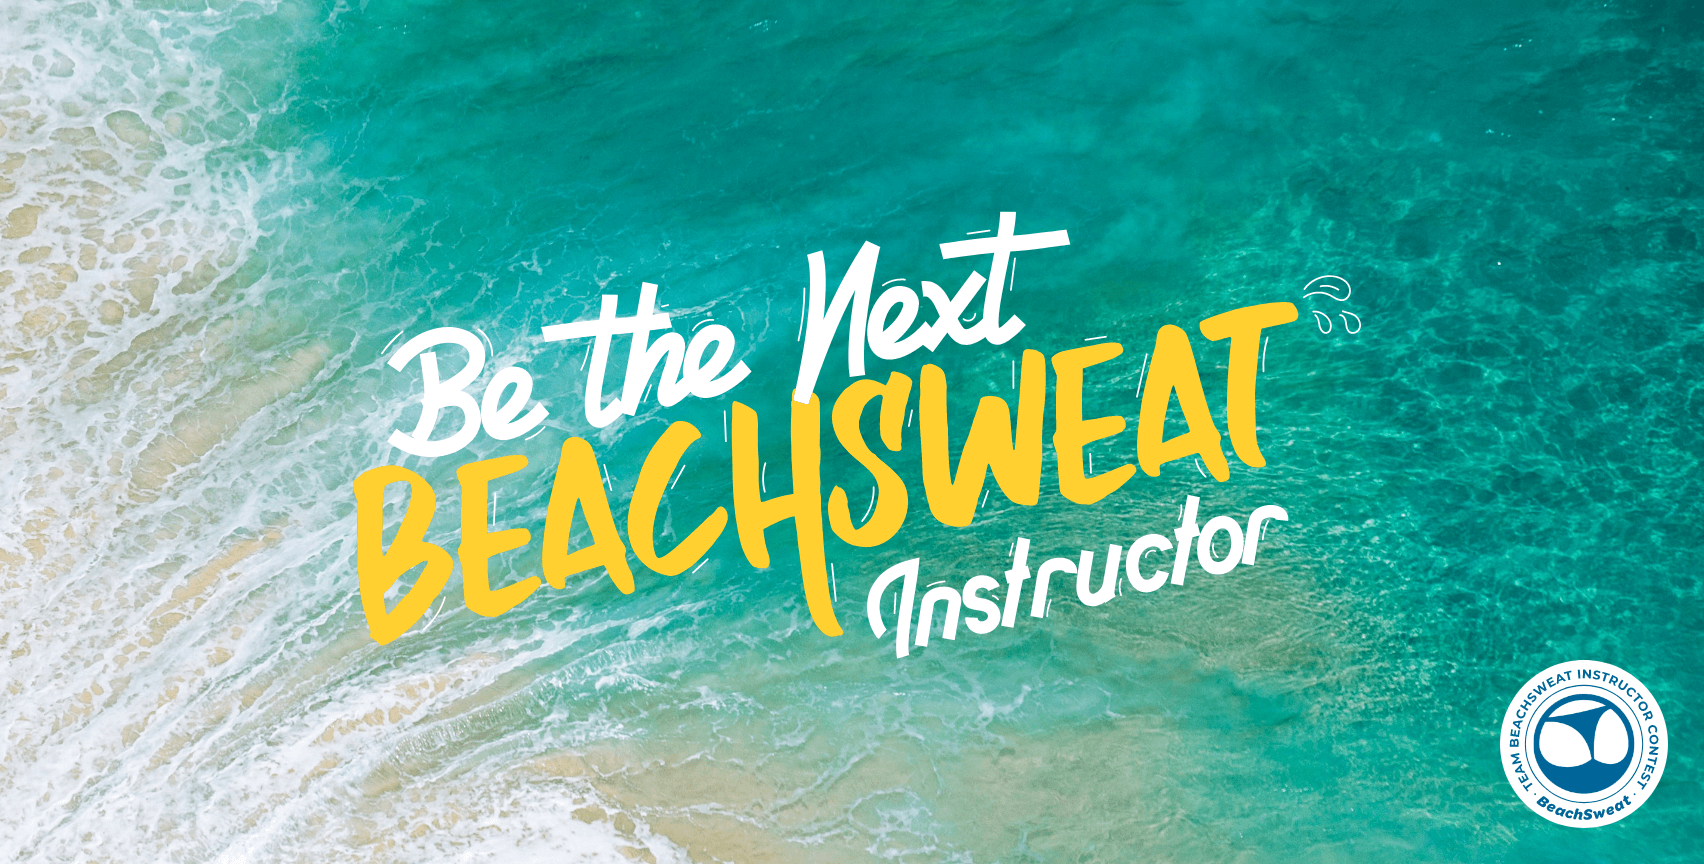 Be the next instructor banner